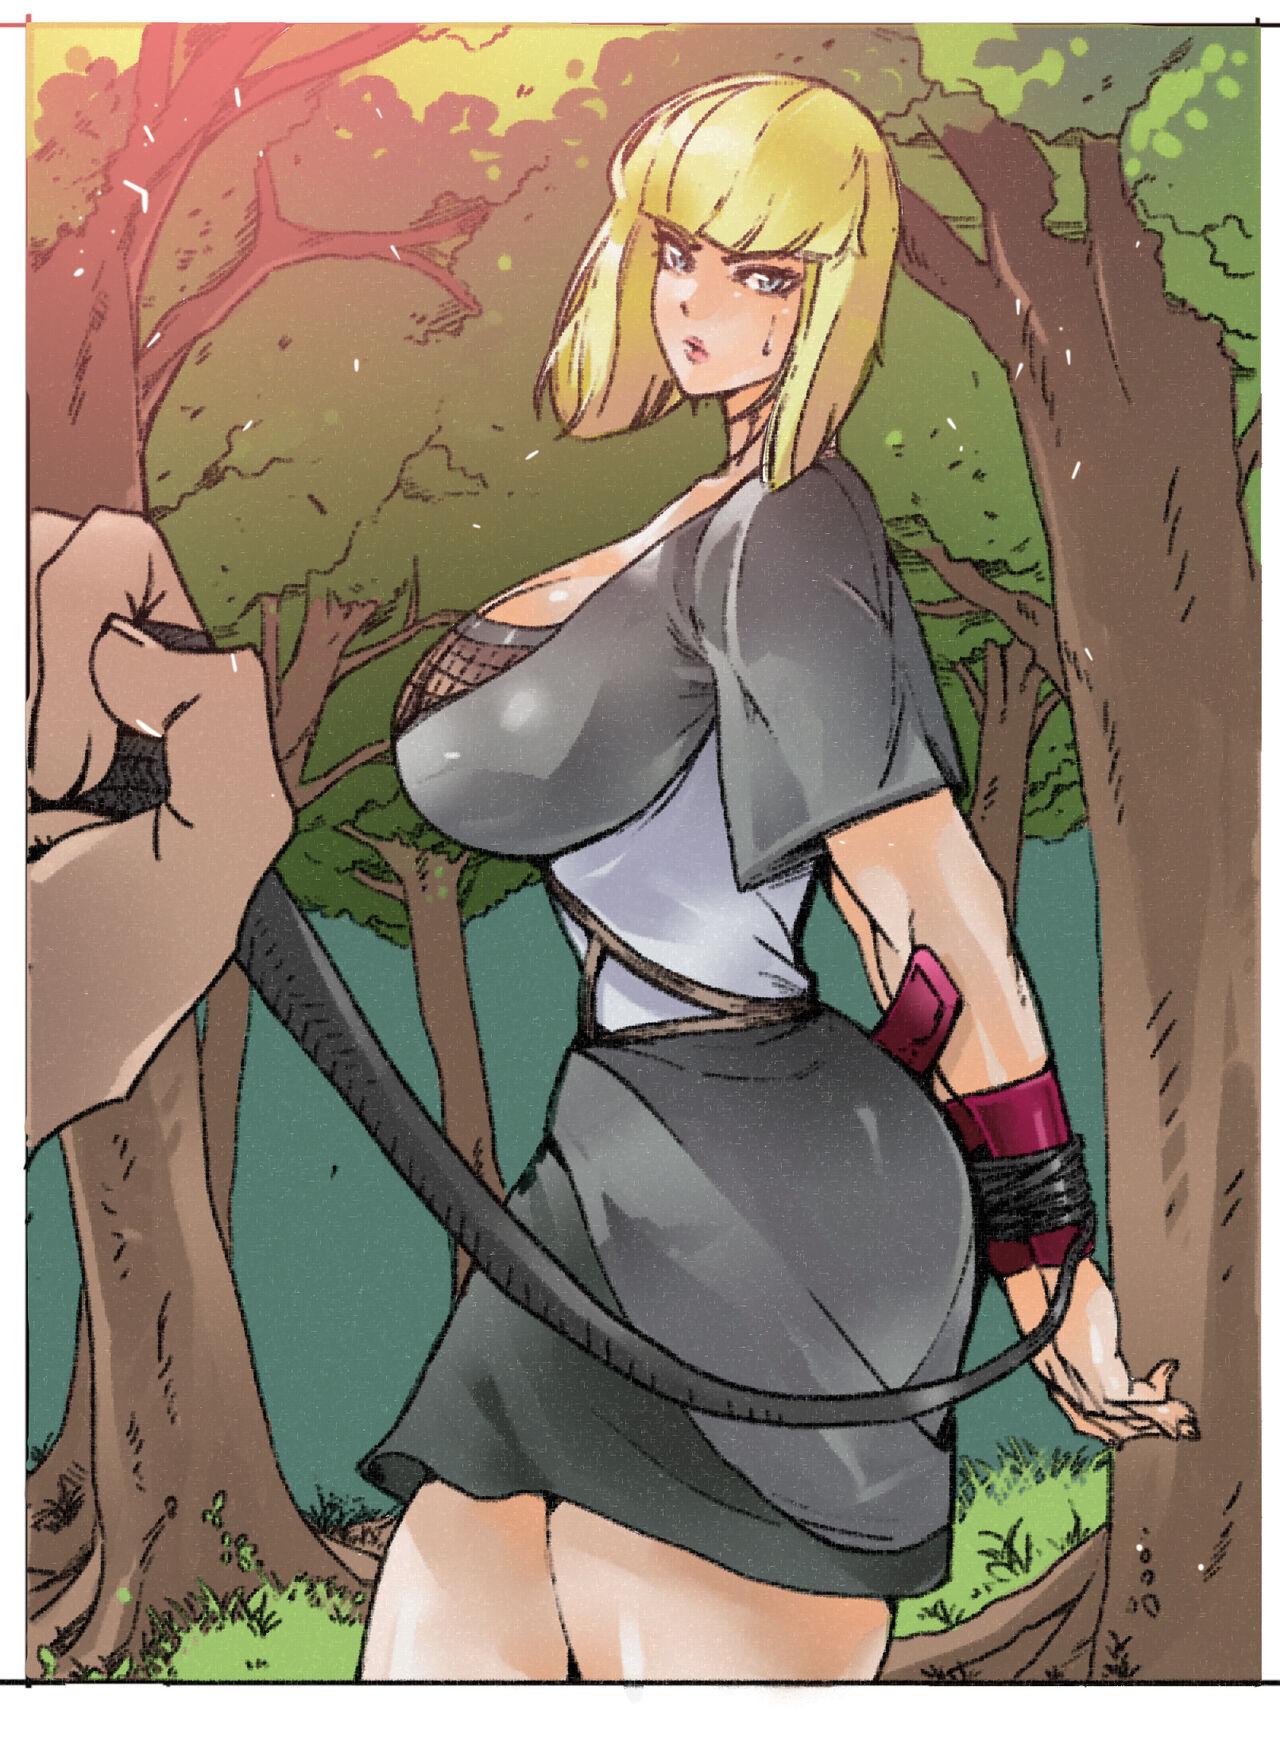 Pegging Captain Samui Isn't Cool Anymore - Naruto Sexy Girl - Page 2